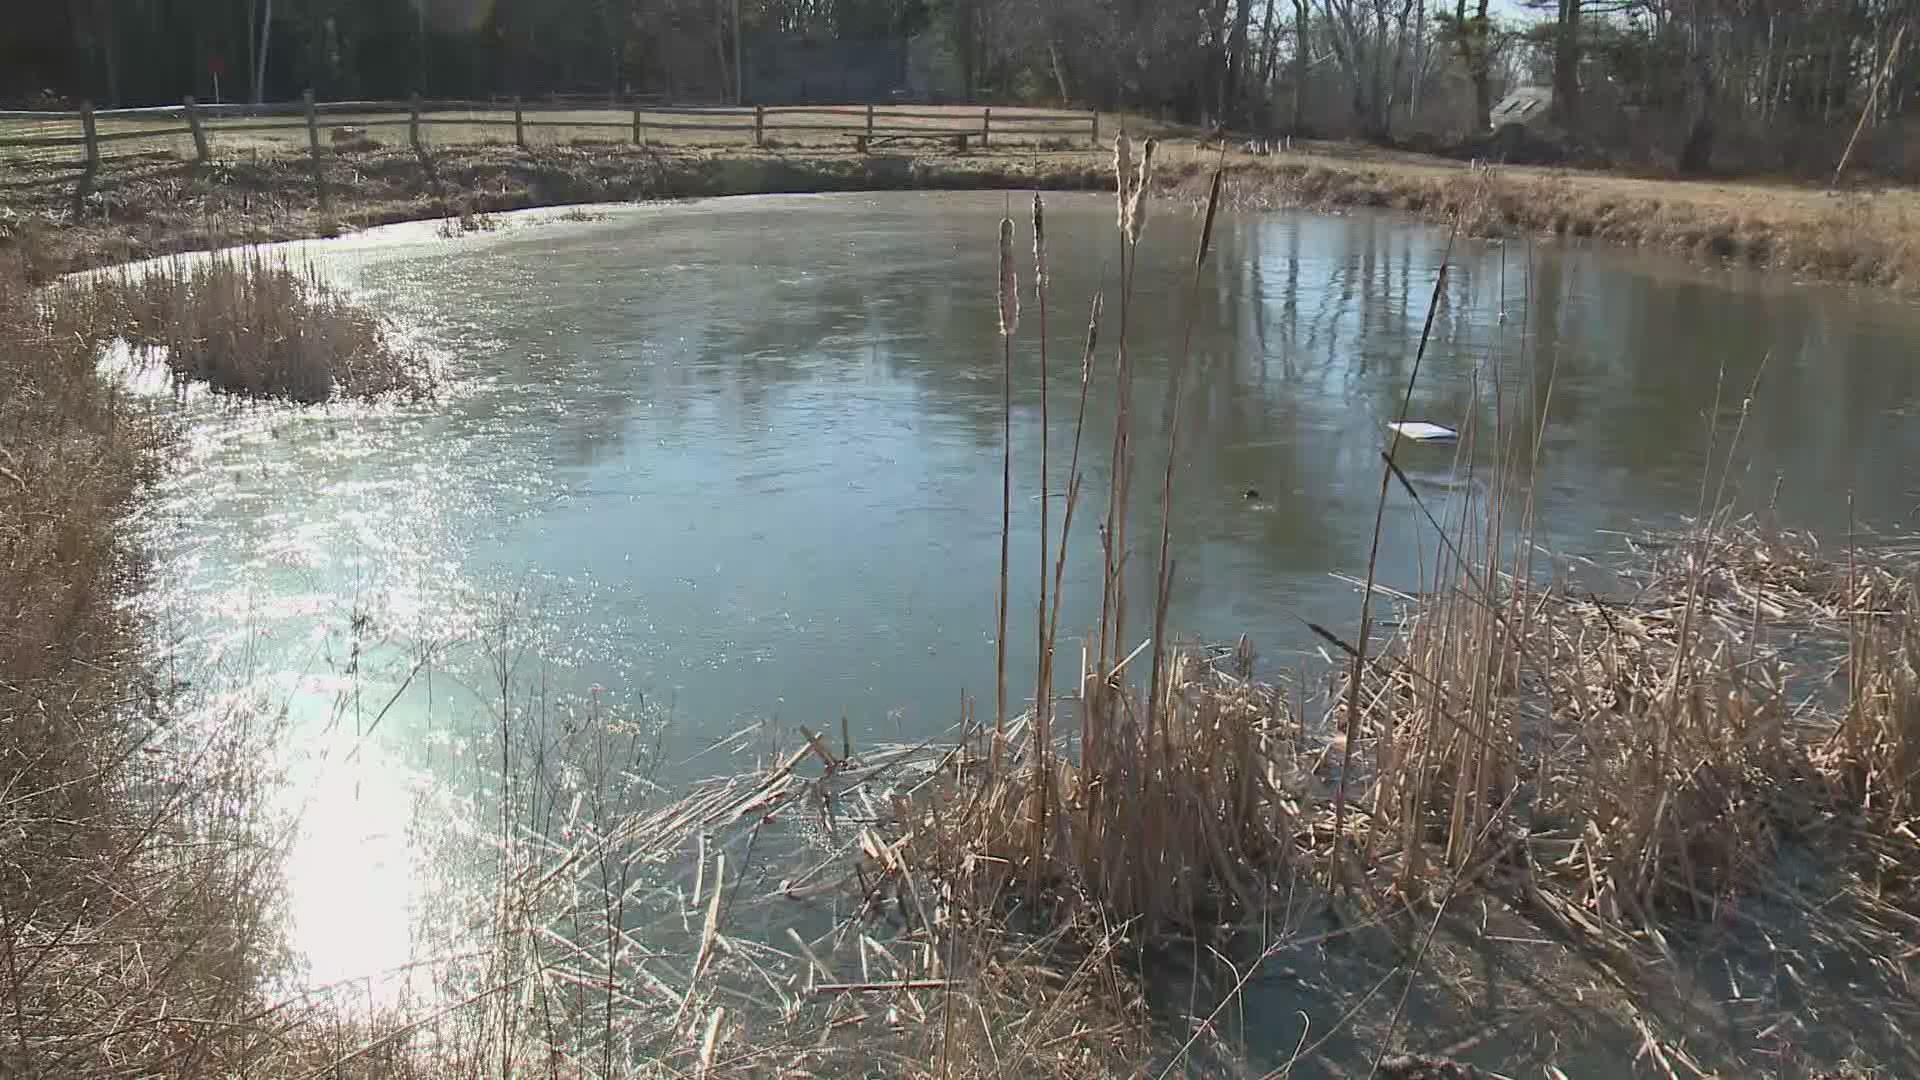 The little pond is located next to the Southport school, and it is used year round for everything from education to ice skating.